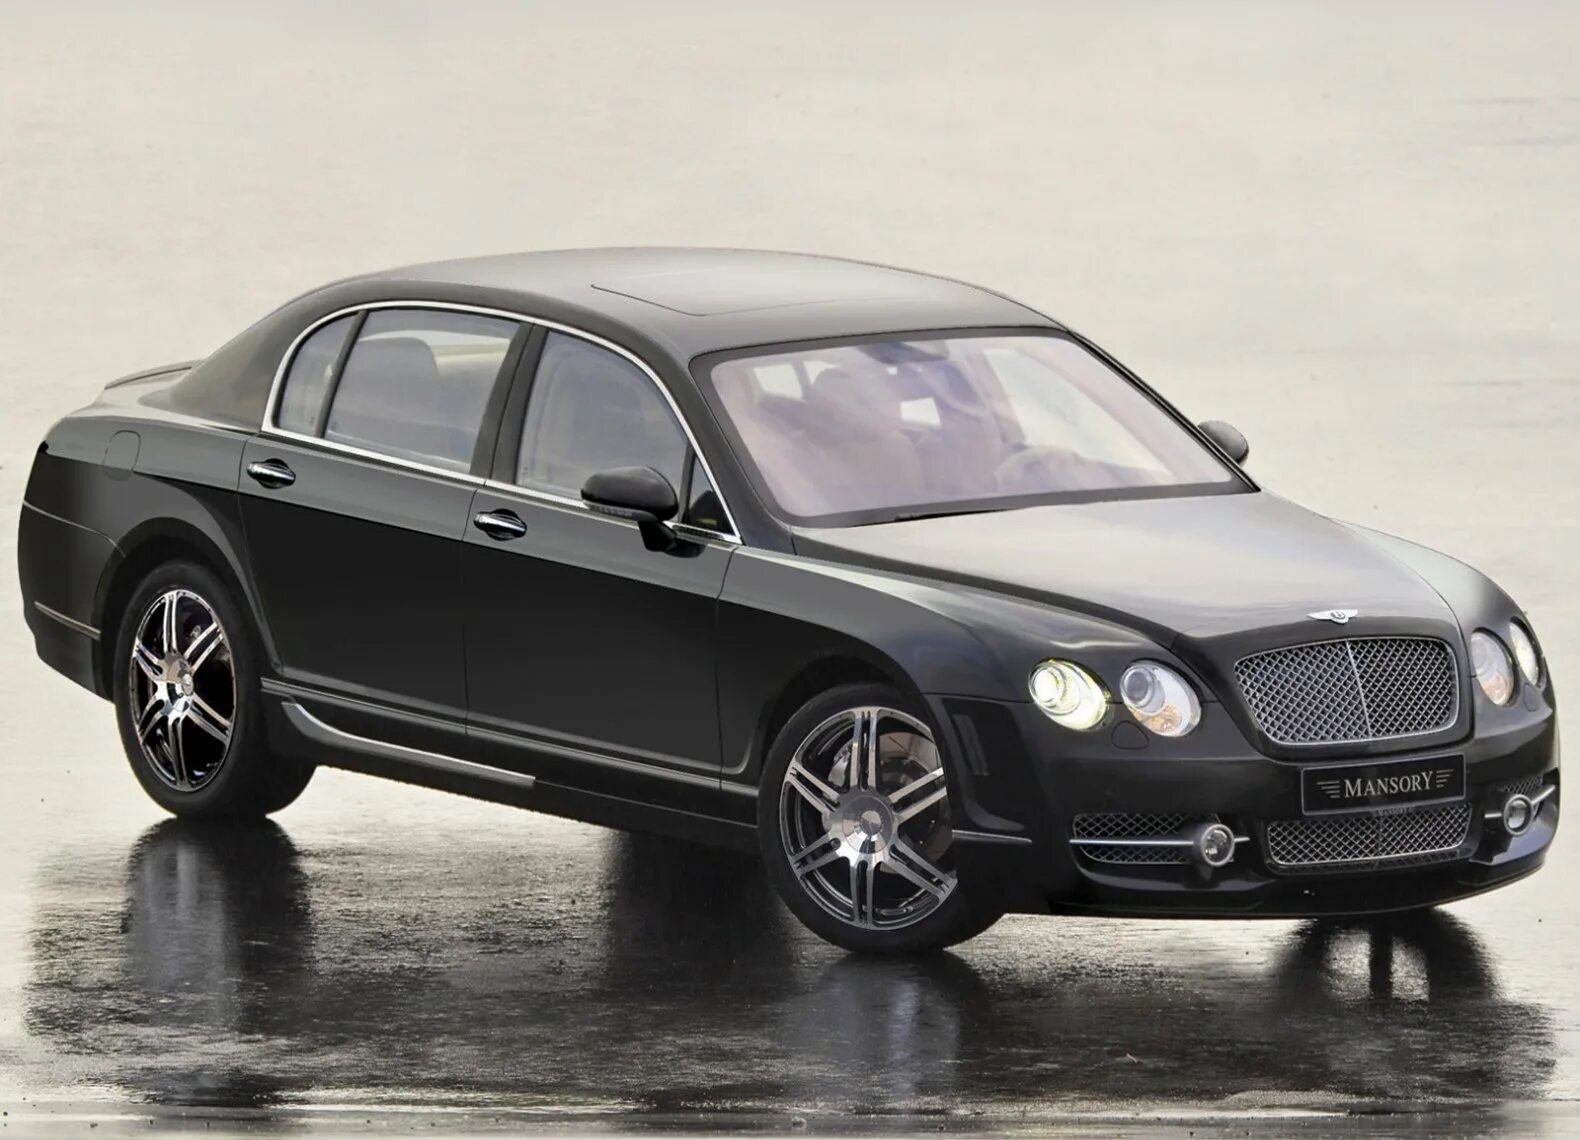 Bentley Continental Flying Spur. Бентли Континенталь Flying Spur 2006. 2006 Bentley Flying Spur Mansory.